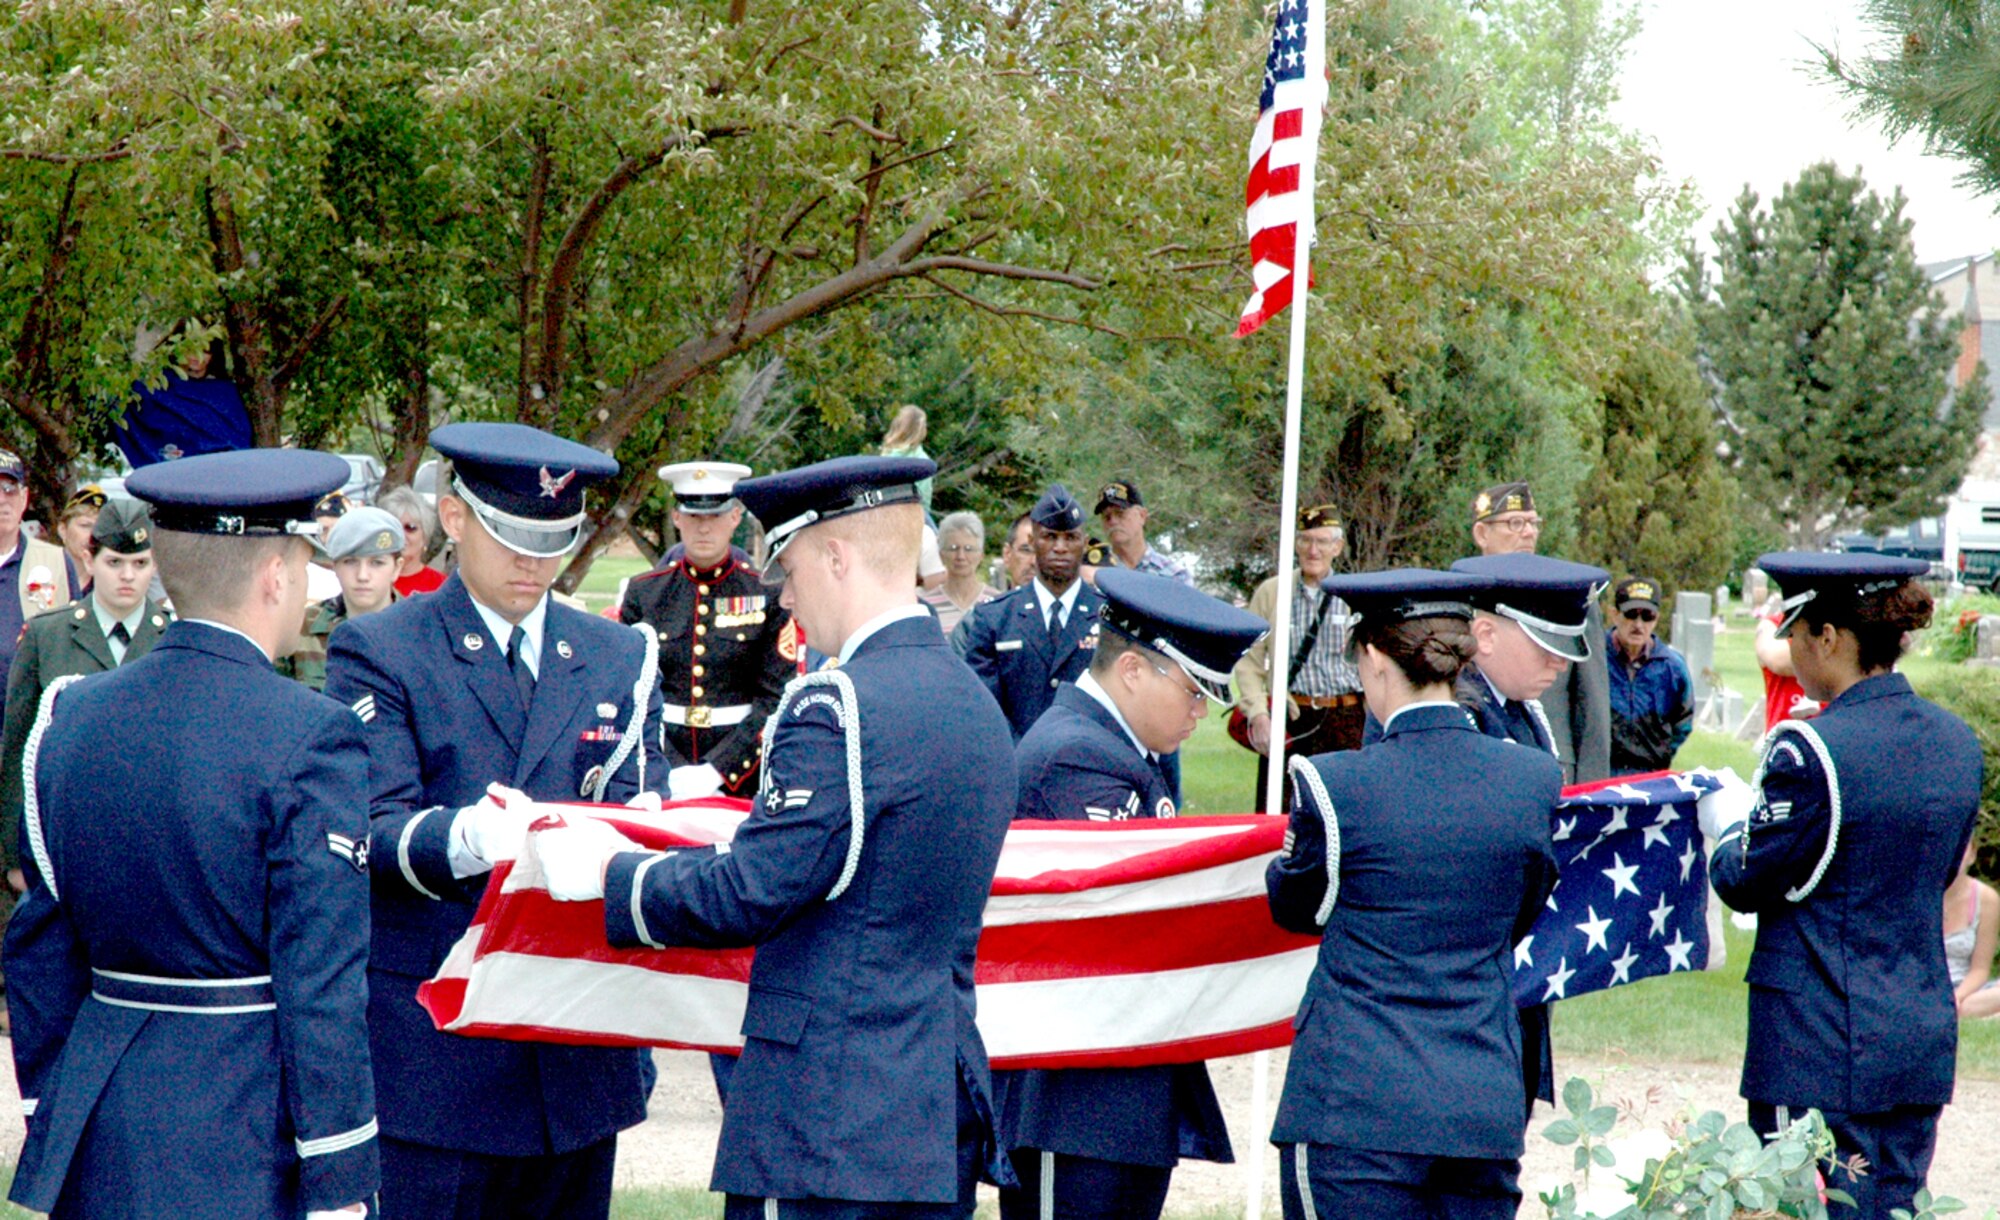 Members of the Warren Honor Guard fold a flag concluding a Memorial Day service at the Beth El Cemetery (Photo by Staff Sgt. Chad Thompson).